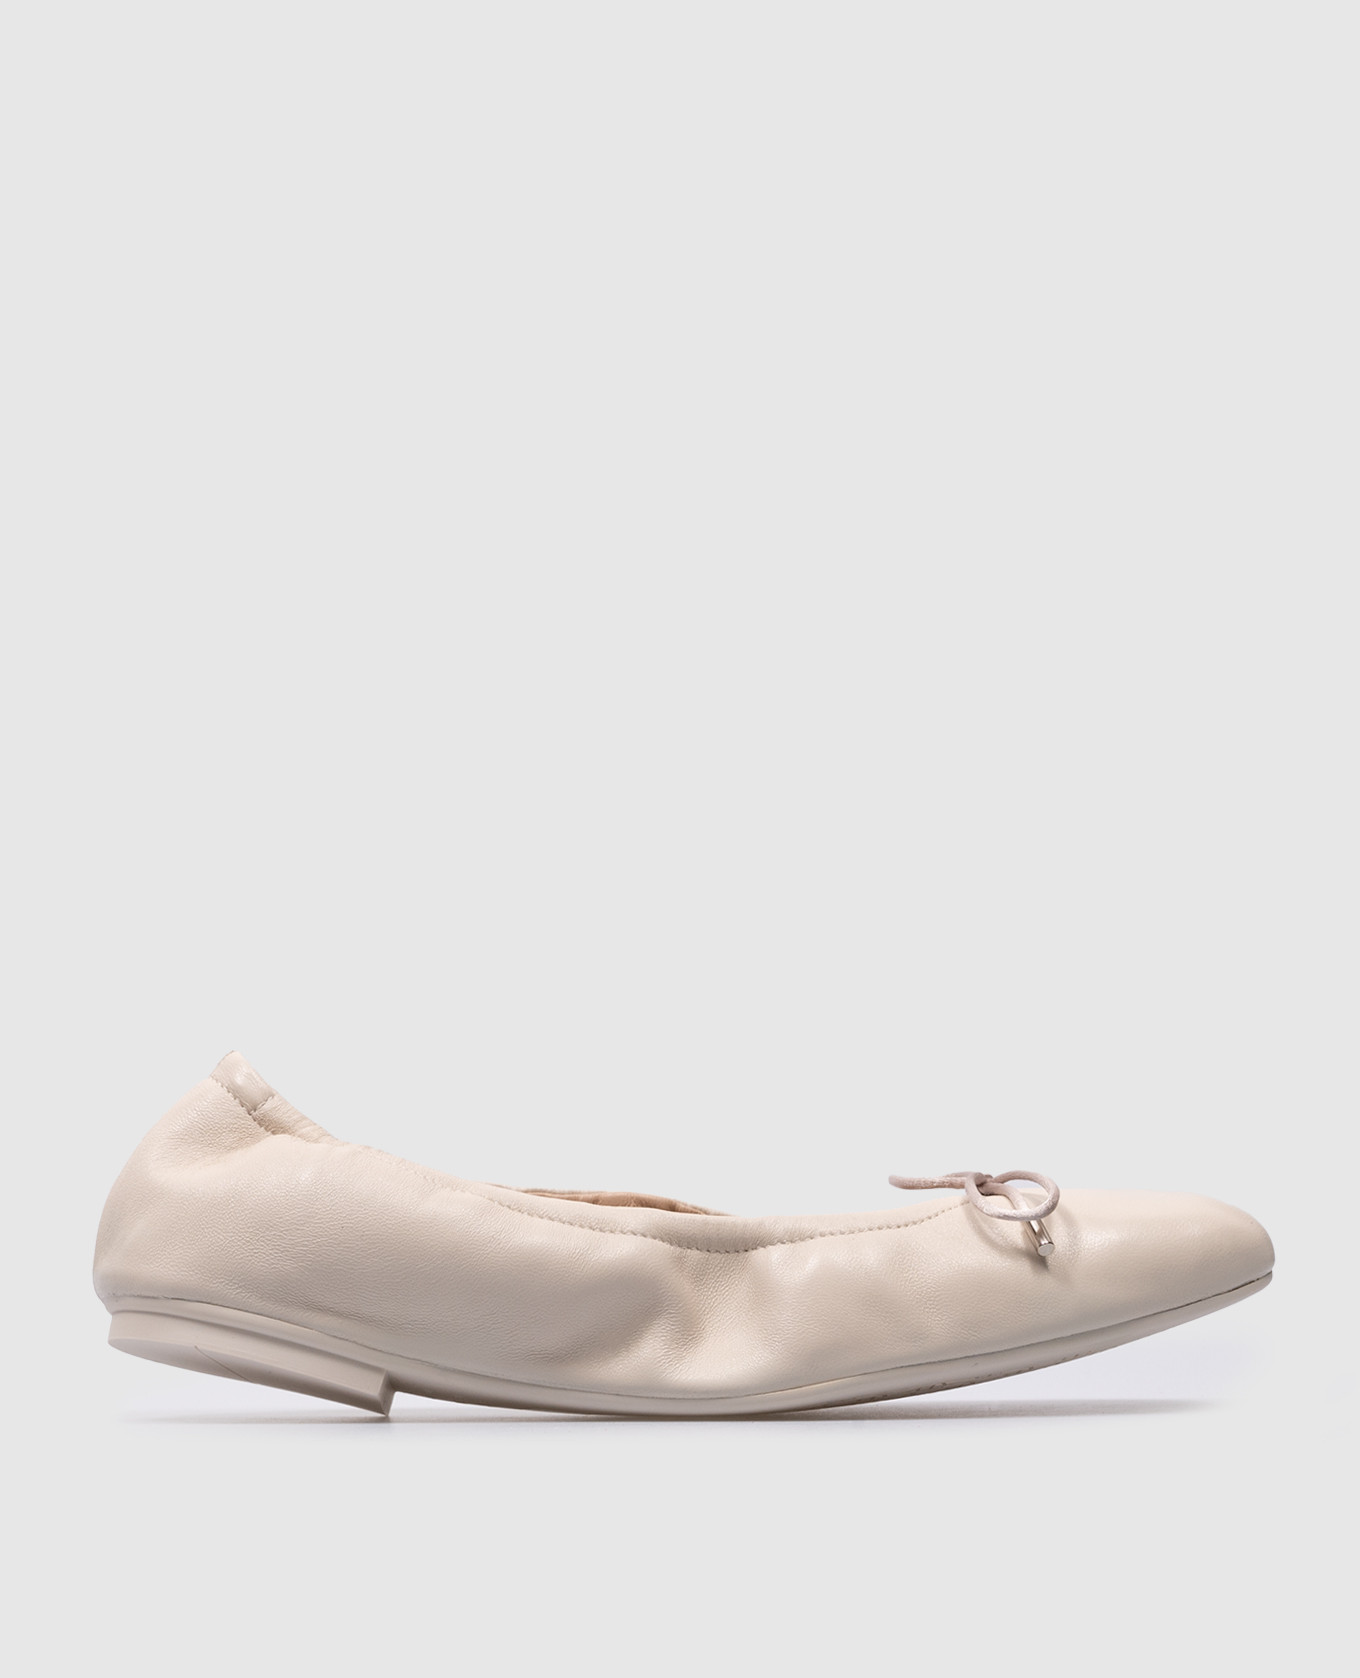 Bardot beige leather ballet flats with a bow